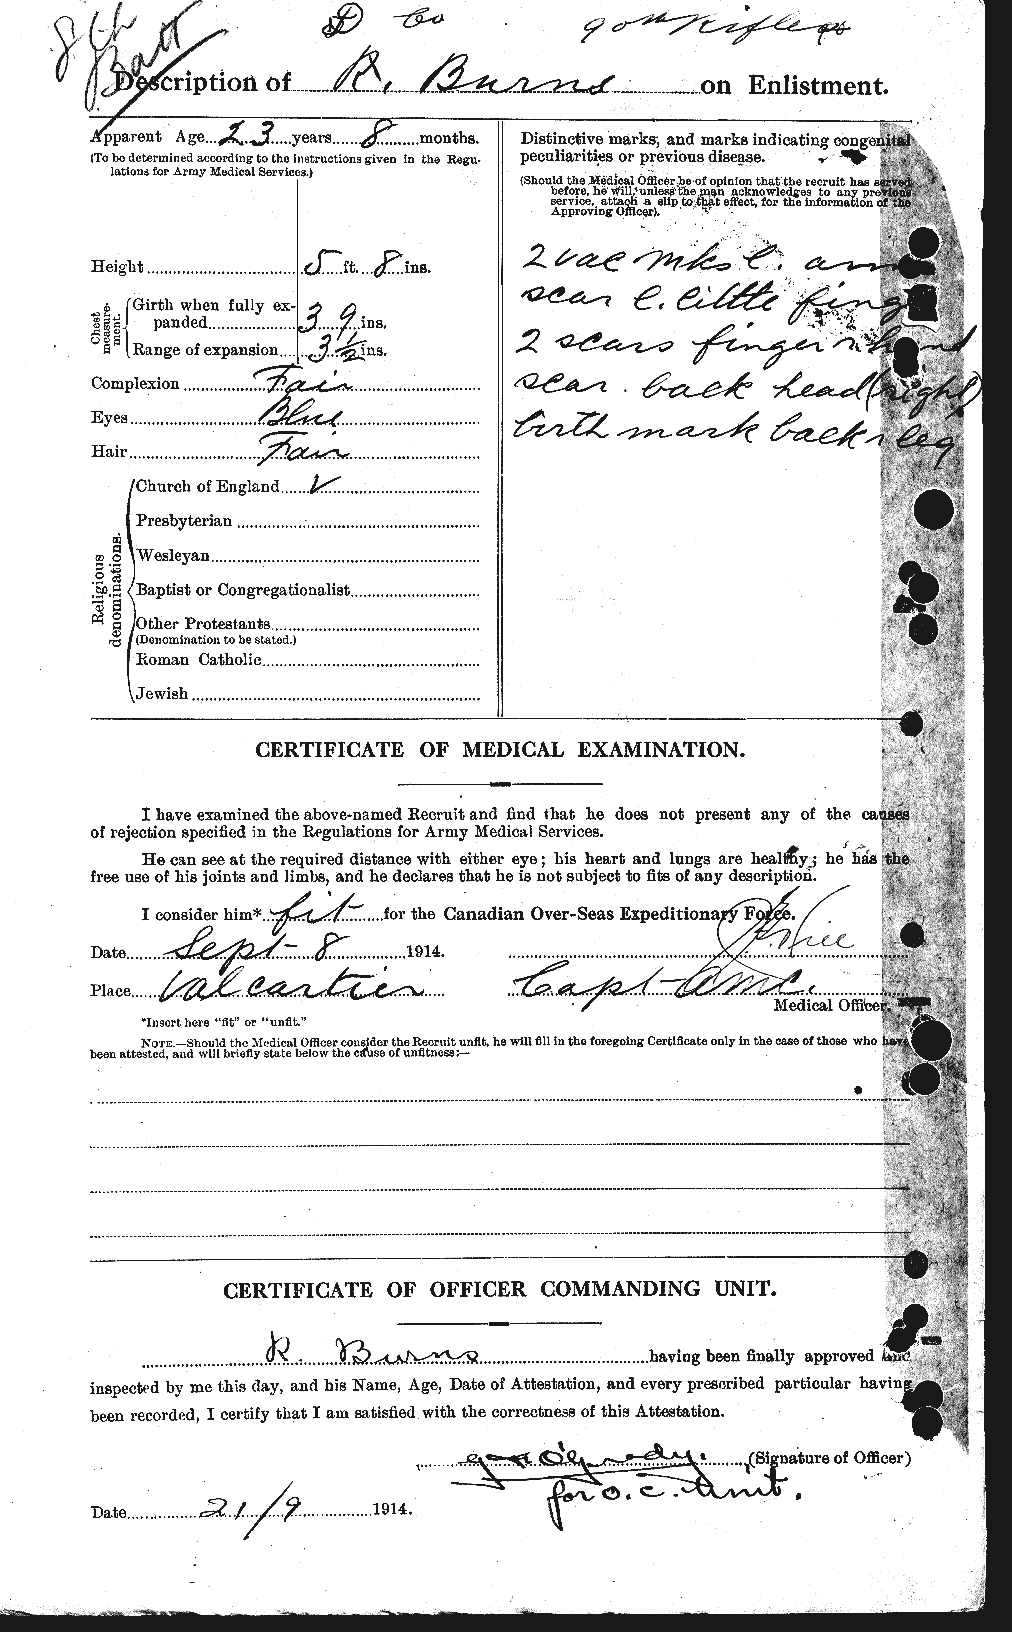 Personnel Records of the First World War - CEF 271739b